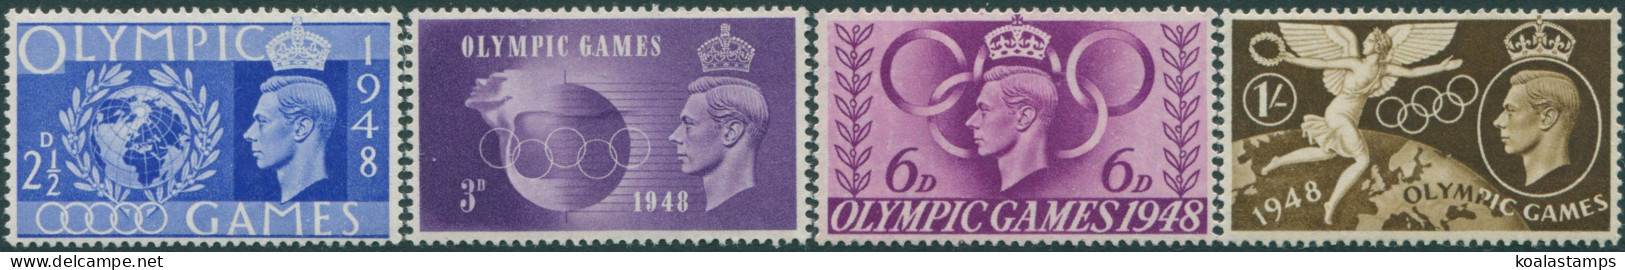 Great Britain 1948 SG495-498 KGVI Olympic Games Set MNH - Unclassified